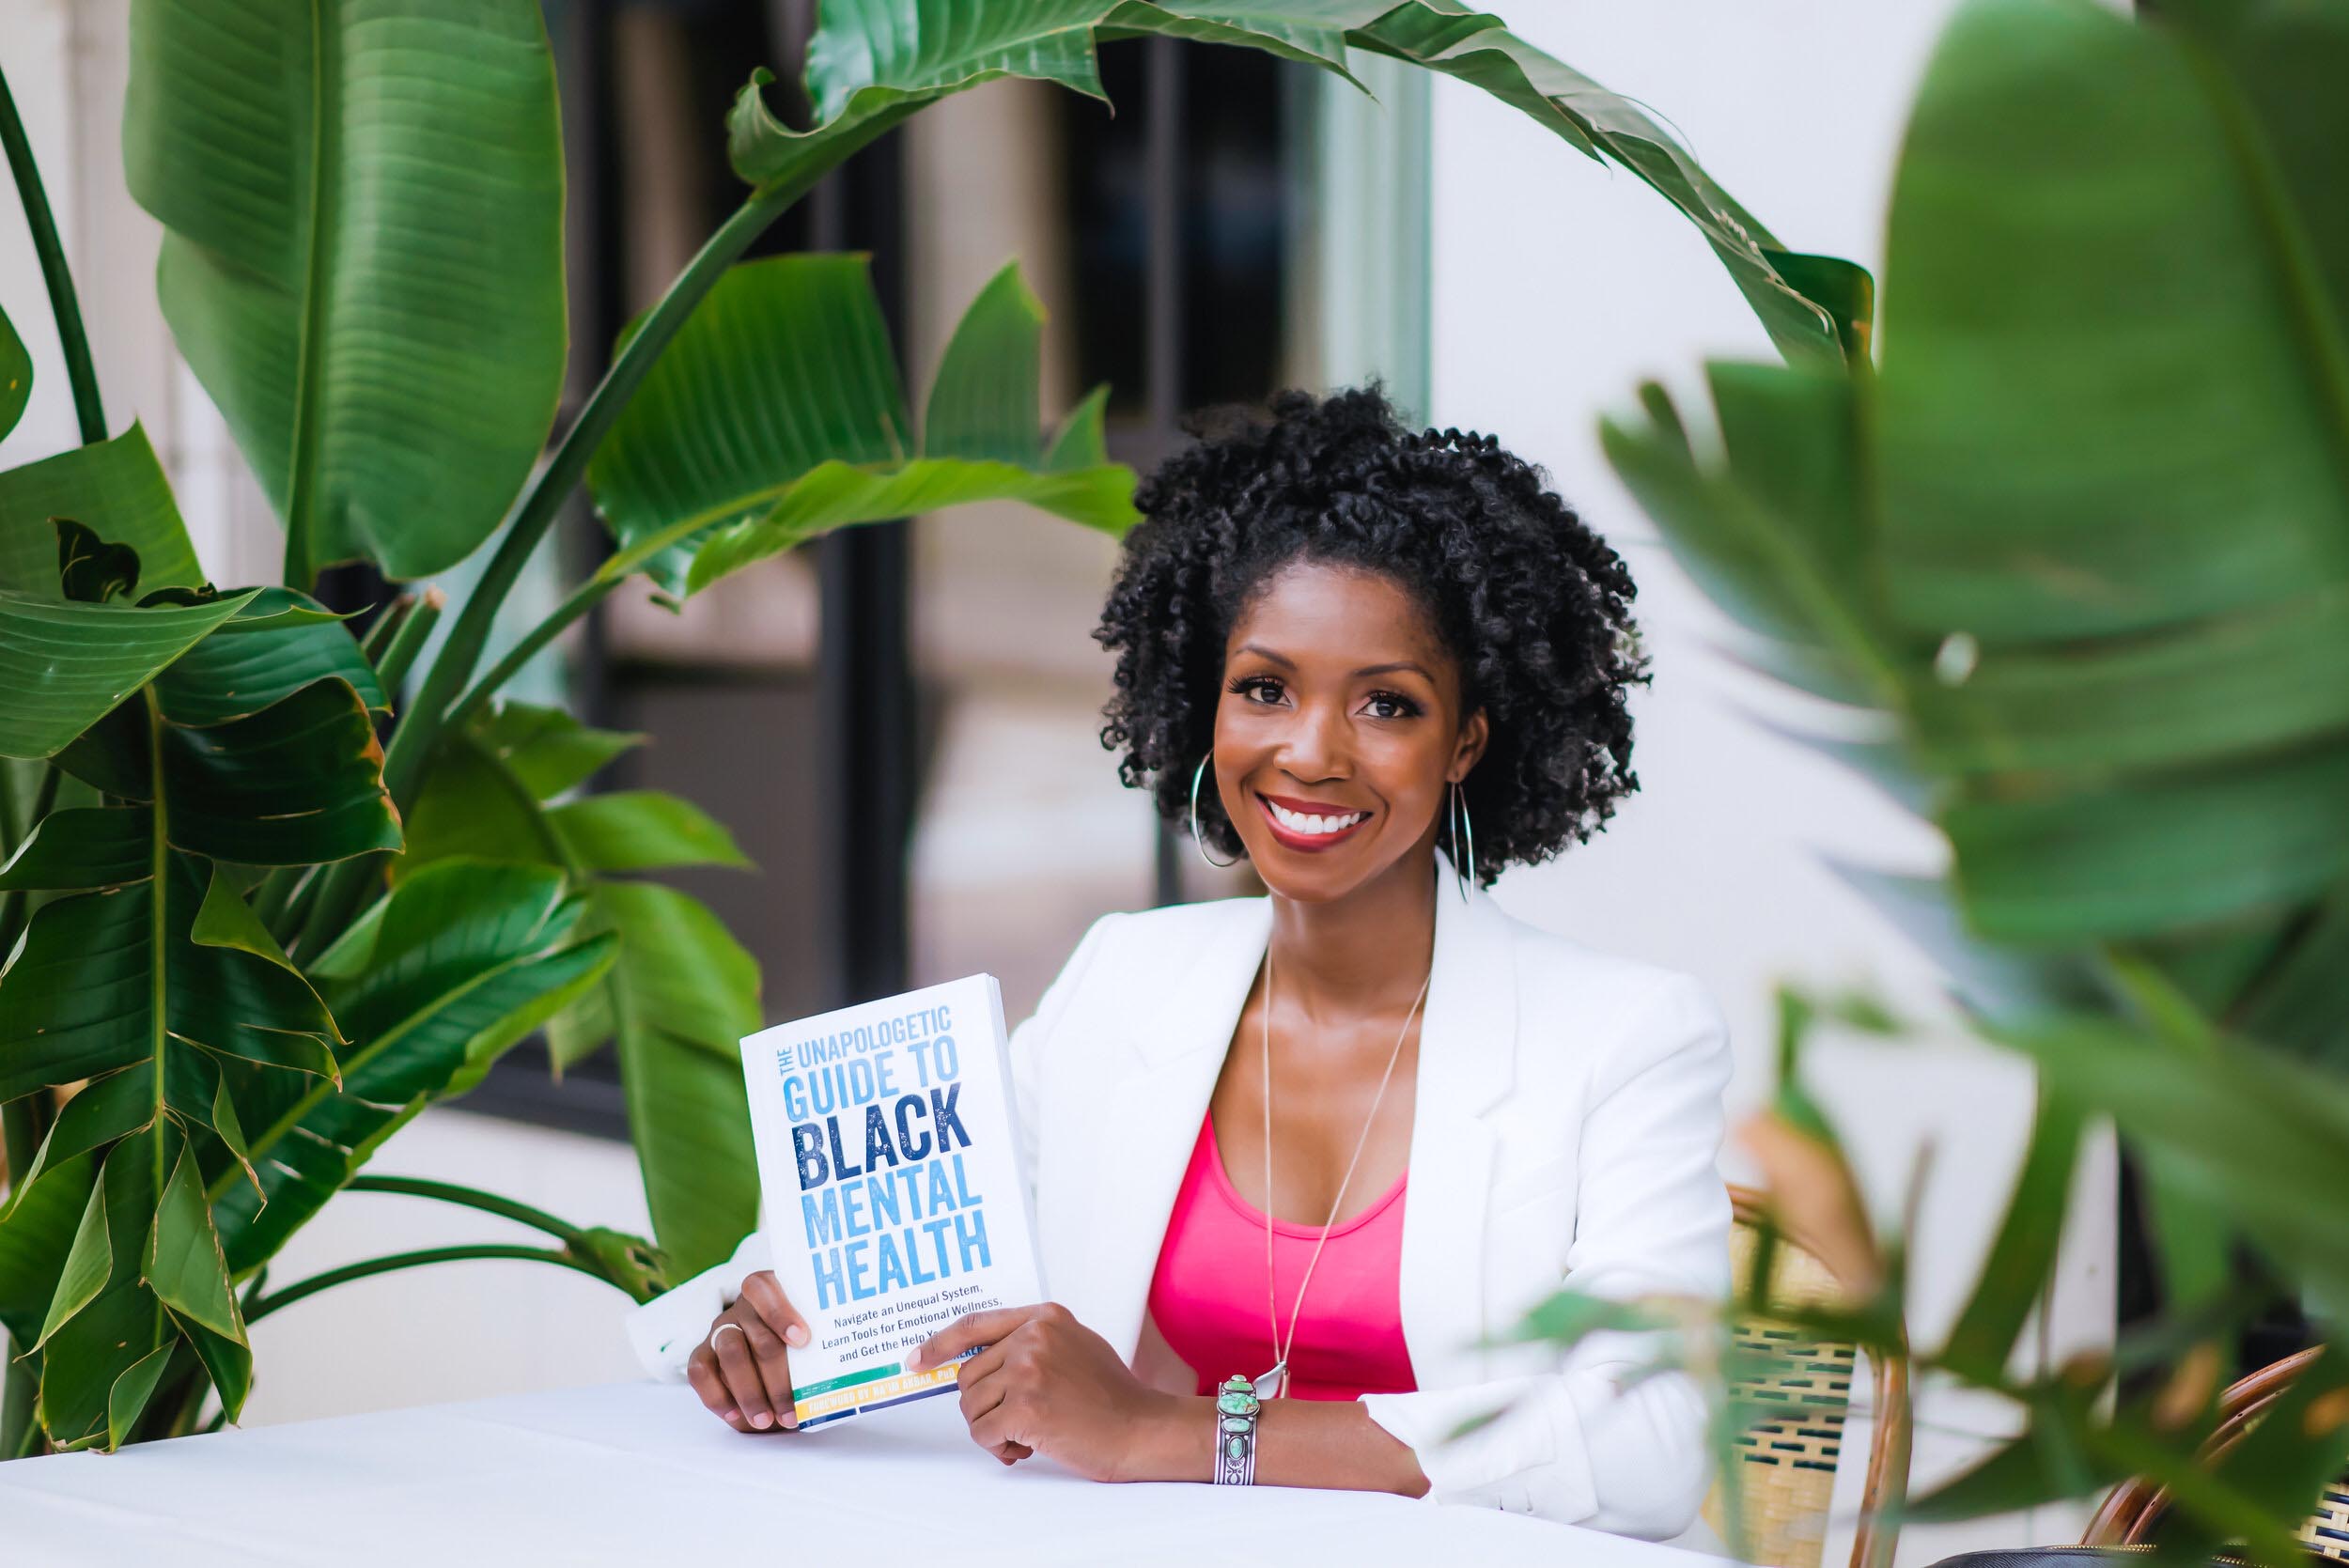 The Unapologetic Guide to Black Mental Health: Navigate an Unequal System, Learn Tools for Emotional Wellness, and Get the Help you Deserve